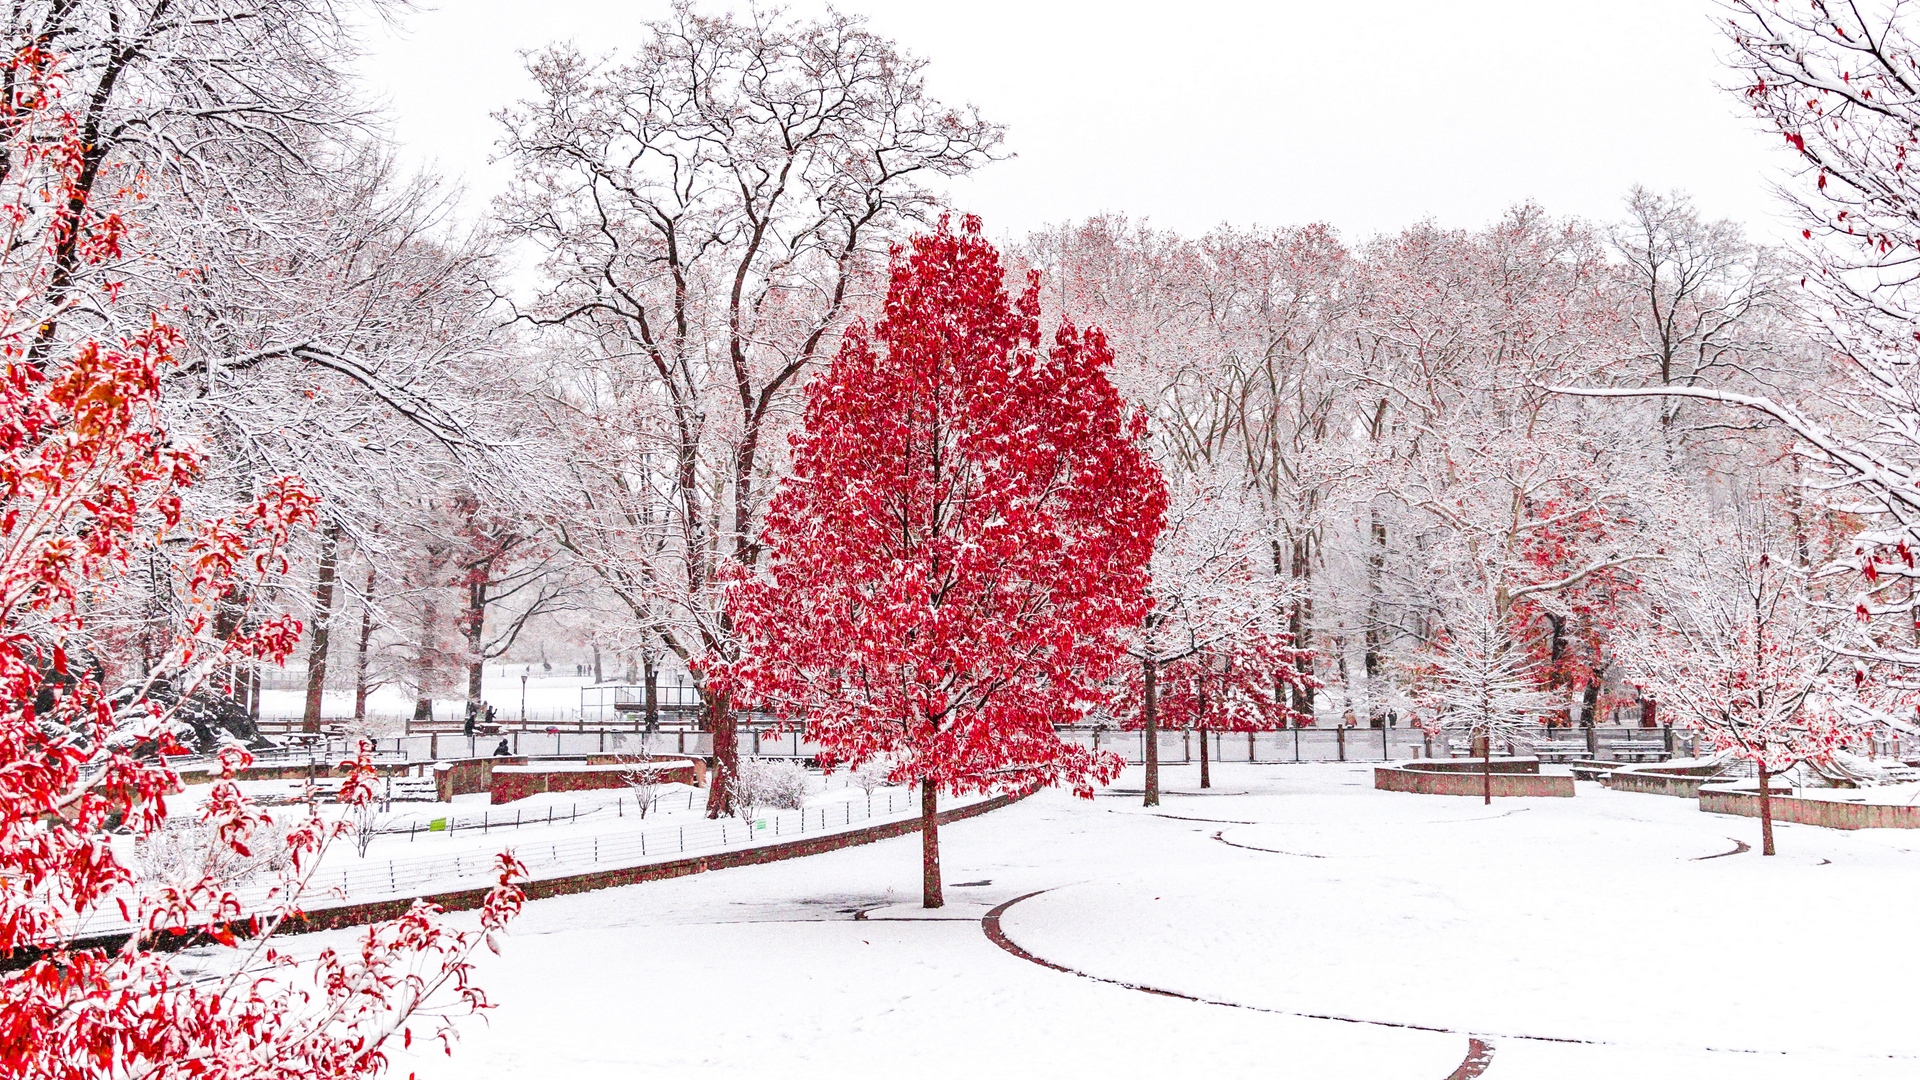 Park Trees Snow View In Winter - Red Tree In Snow - HD Wallpaper 